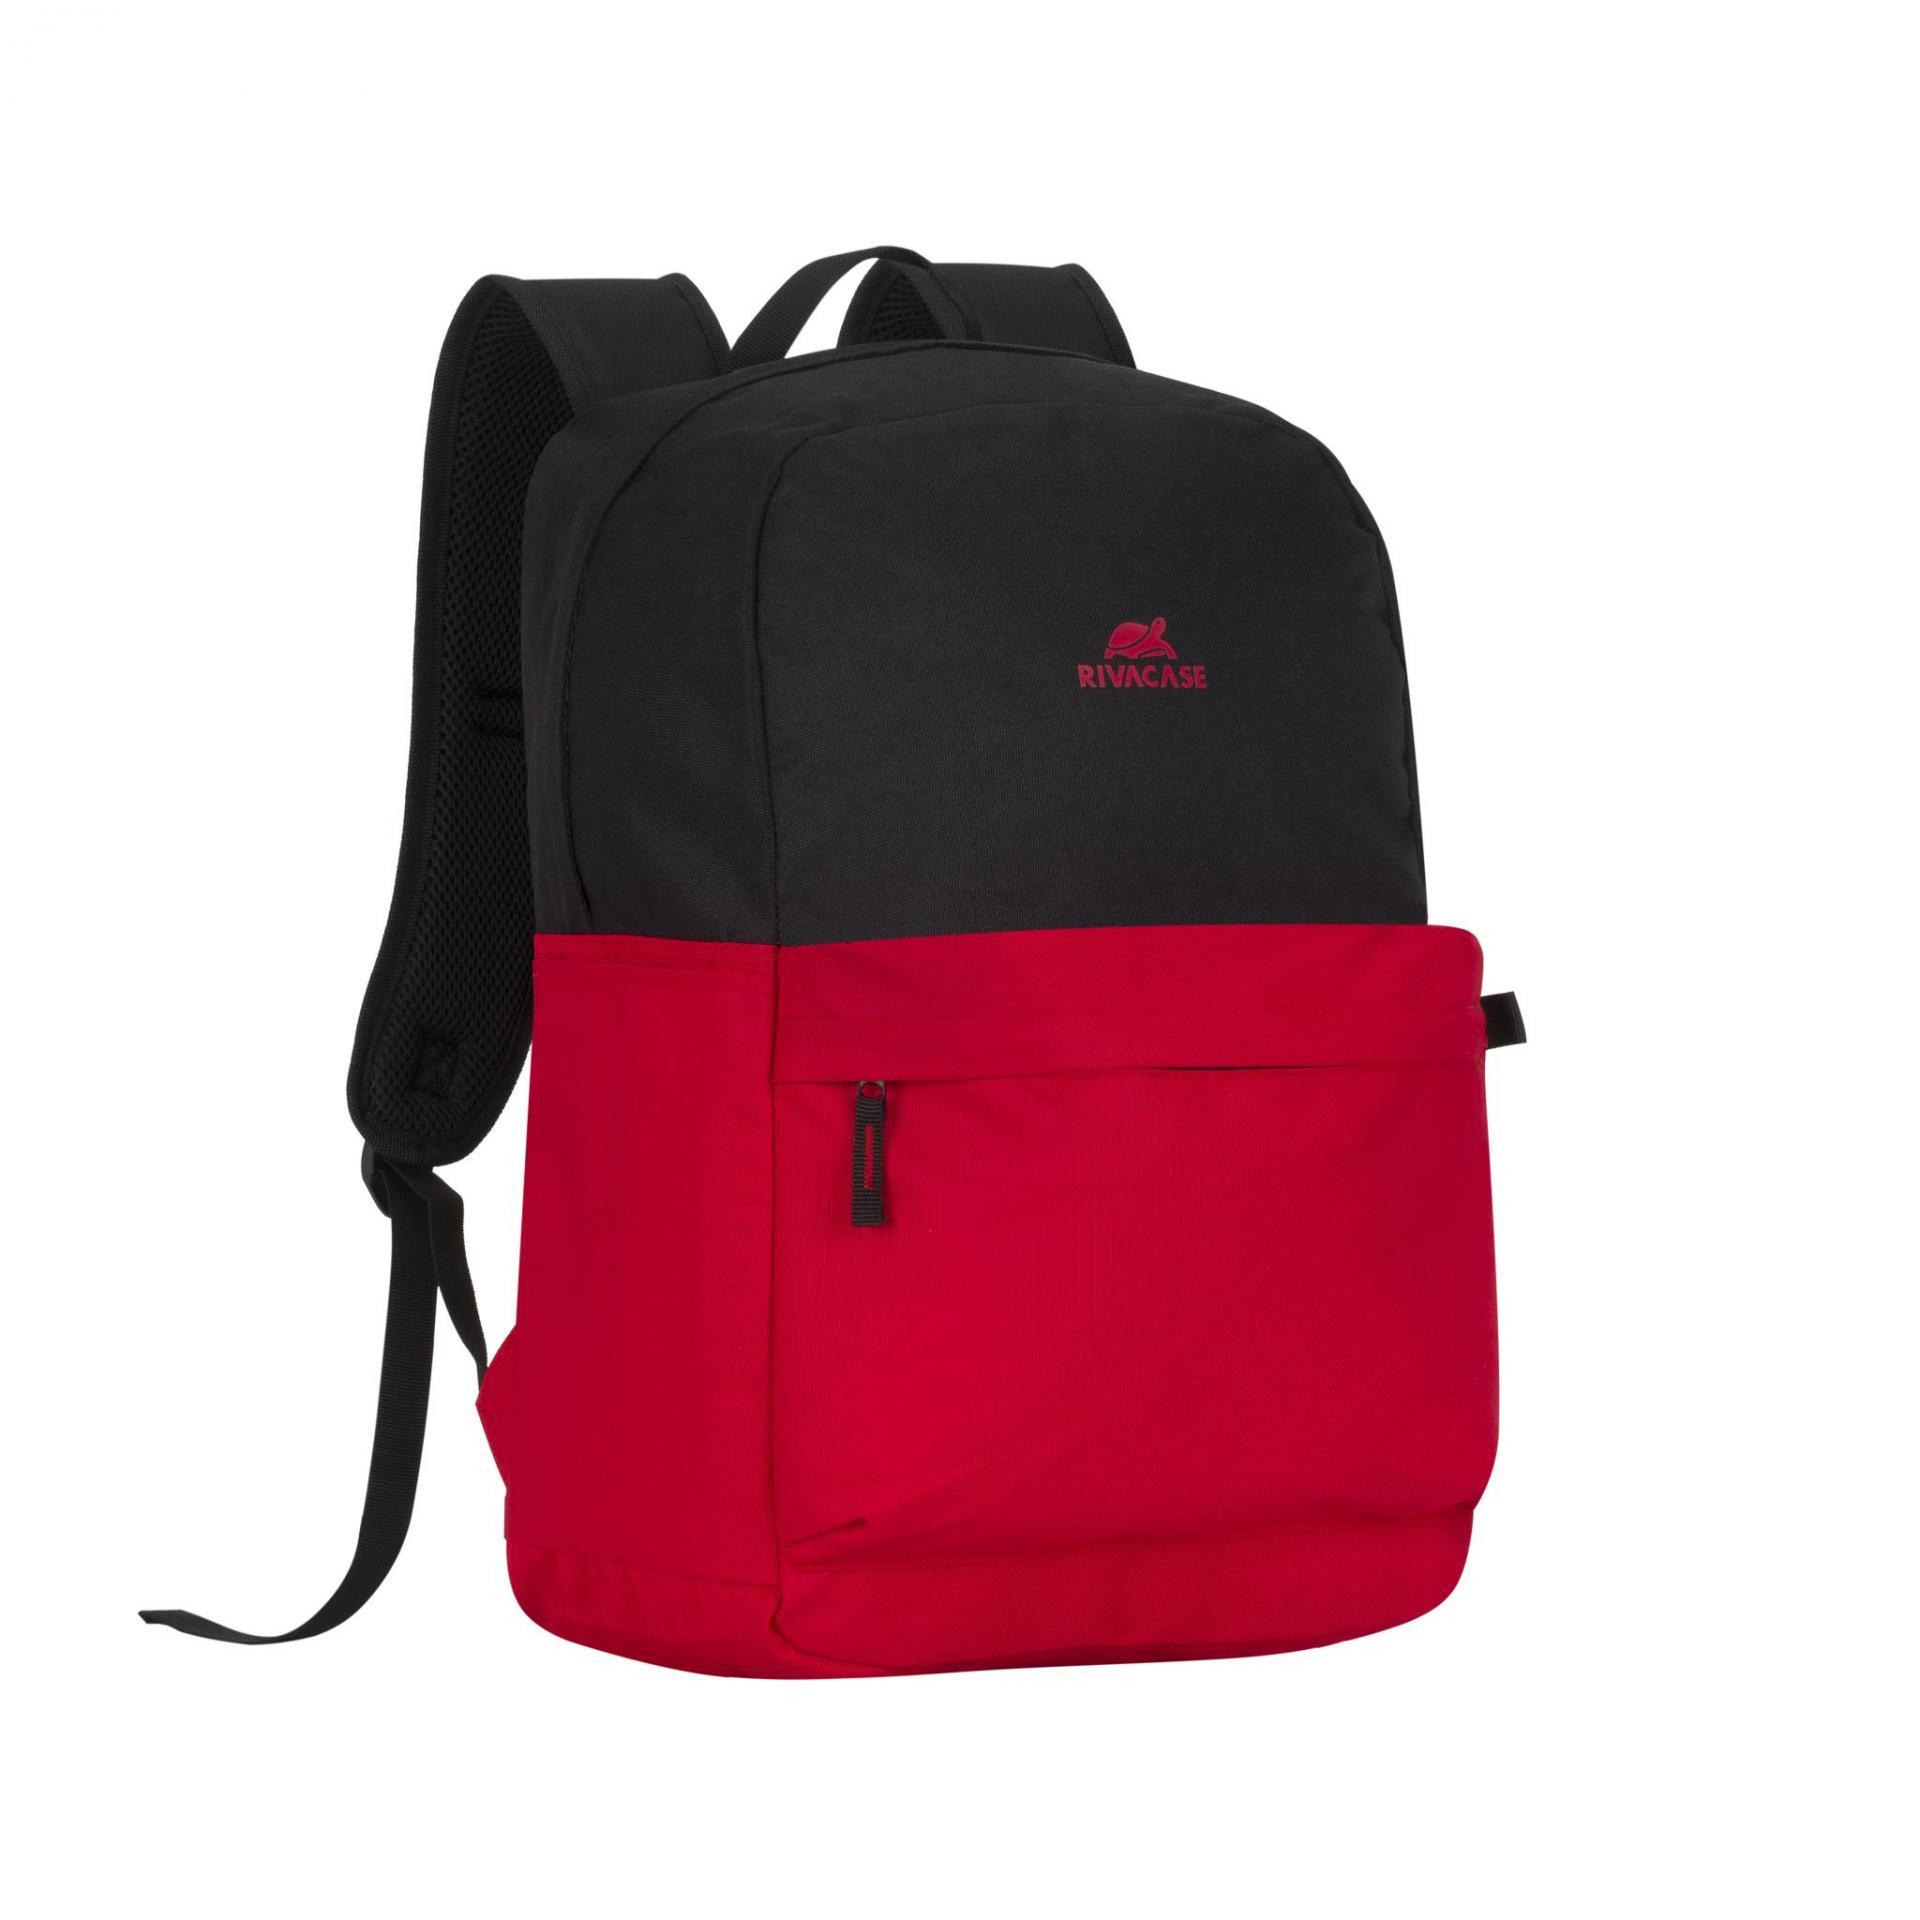 RIVACASE 5560 black/pure red backpack 15.6